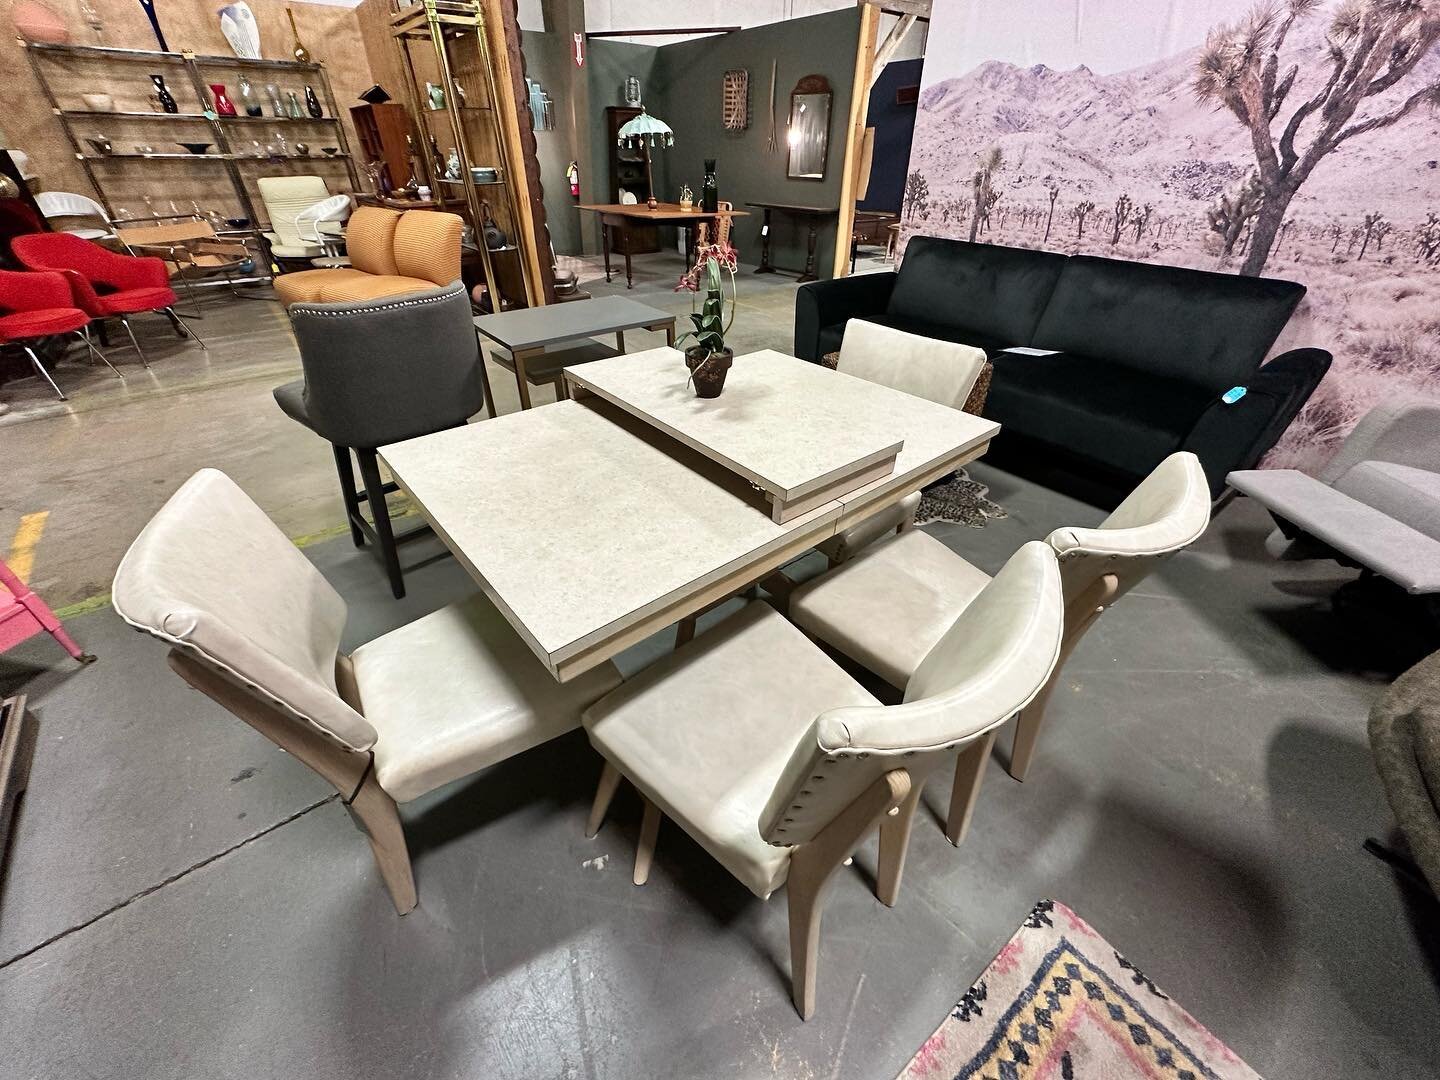 Happy Wednesday! Getting you through that midweek blues. Check out all the new inventory that just arrived! Open daily. New treasures daily. Fantastic music selection daily. Smiling faces daily. 😍#midmod #modern #antique #asheville #midcentury #midc